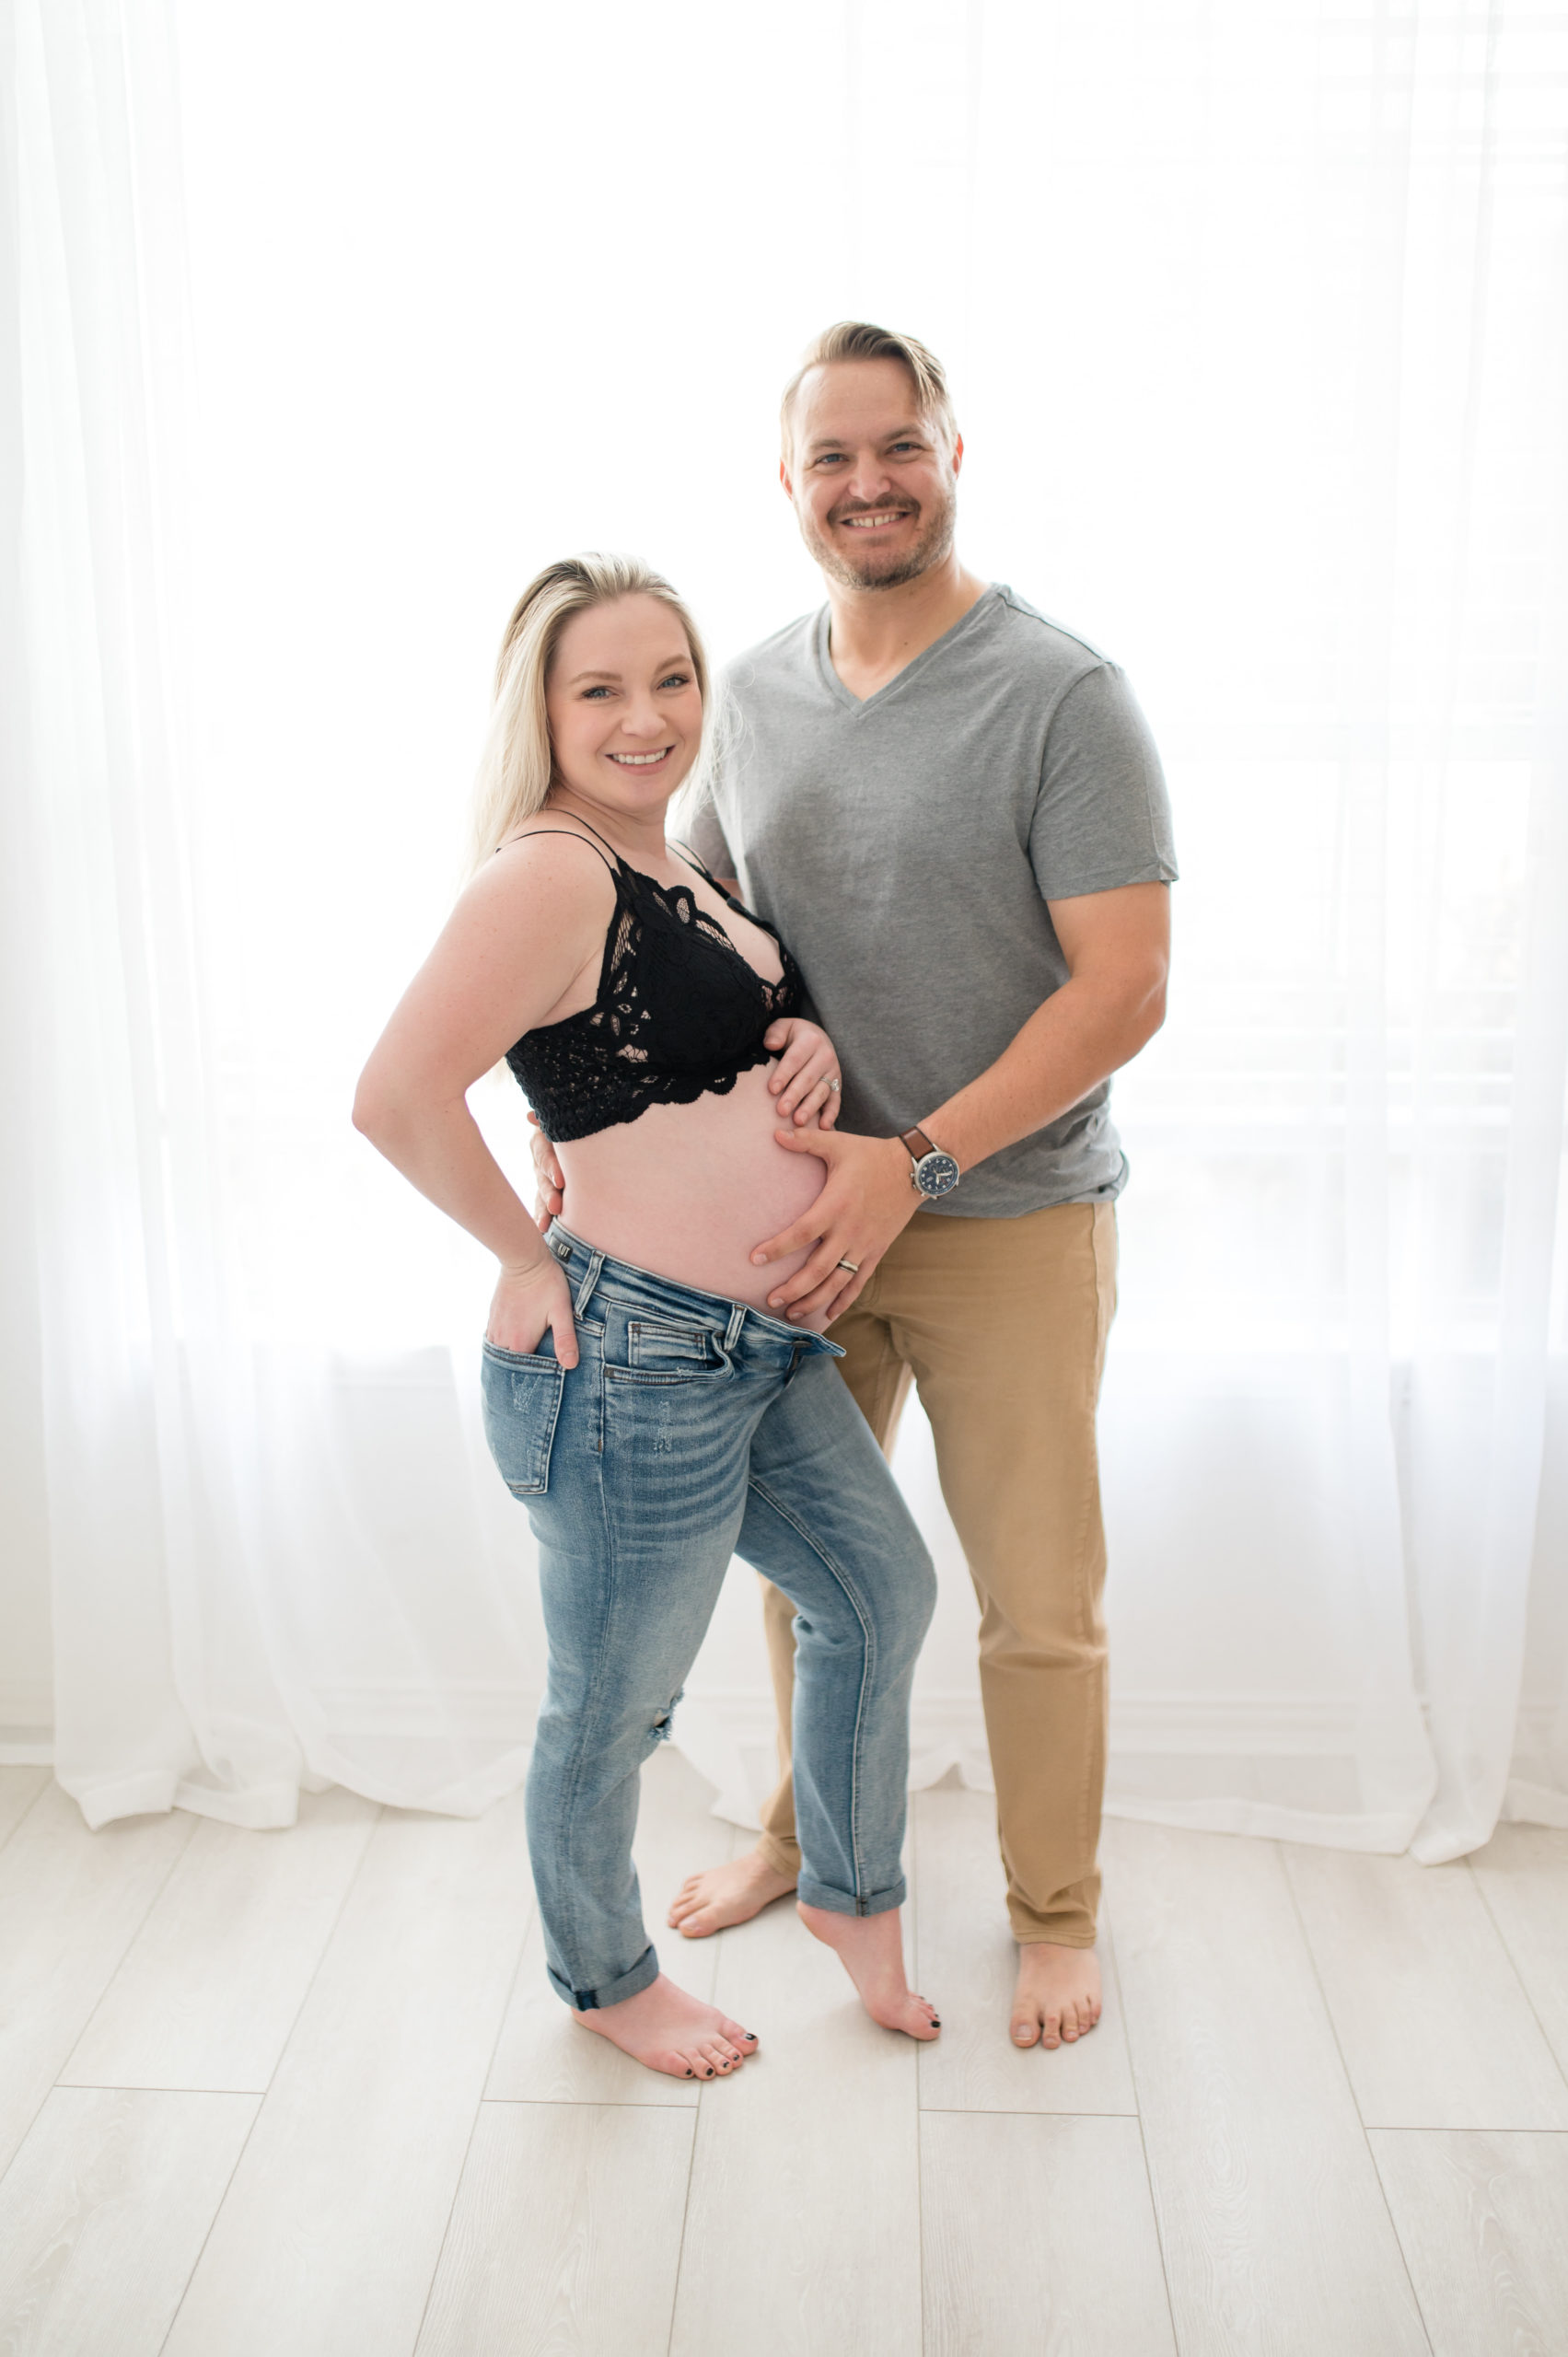 Husband and wife in causal clothes in studio maternity in dallas texas photographed by Dallas newborn photographer, Lindsey Dutton Photography